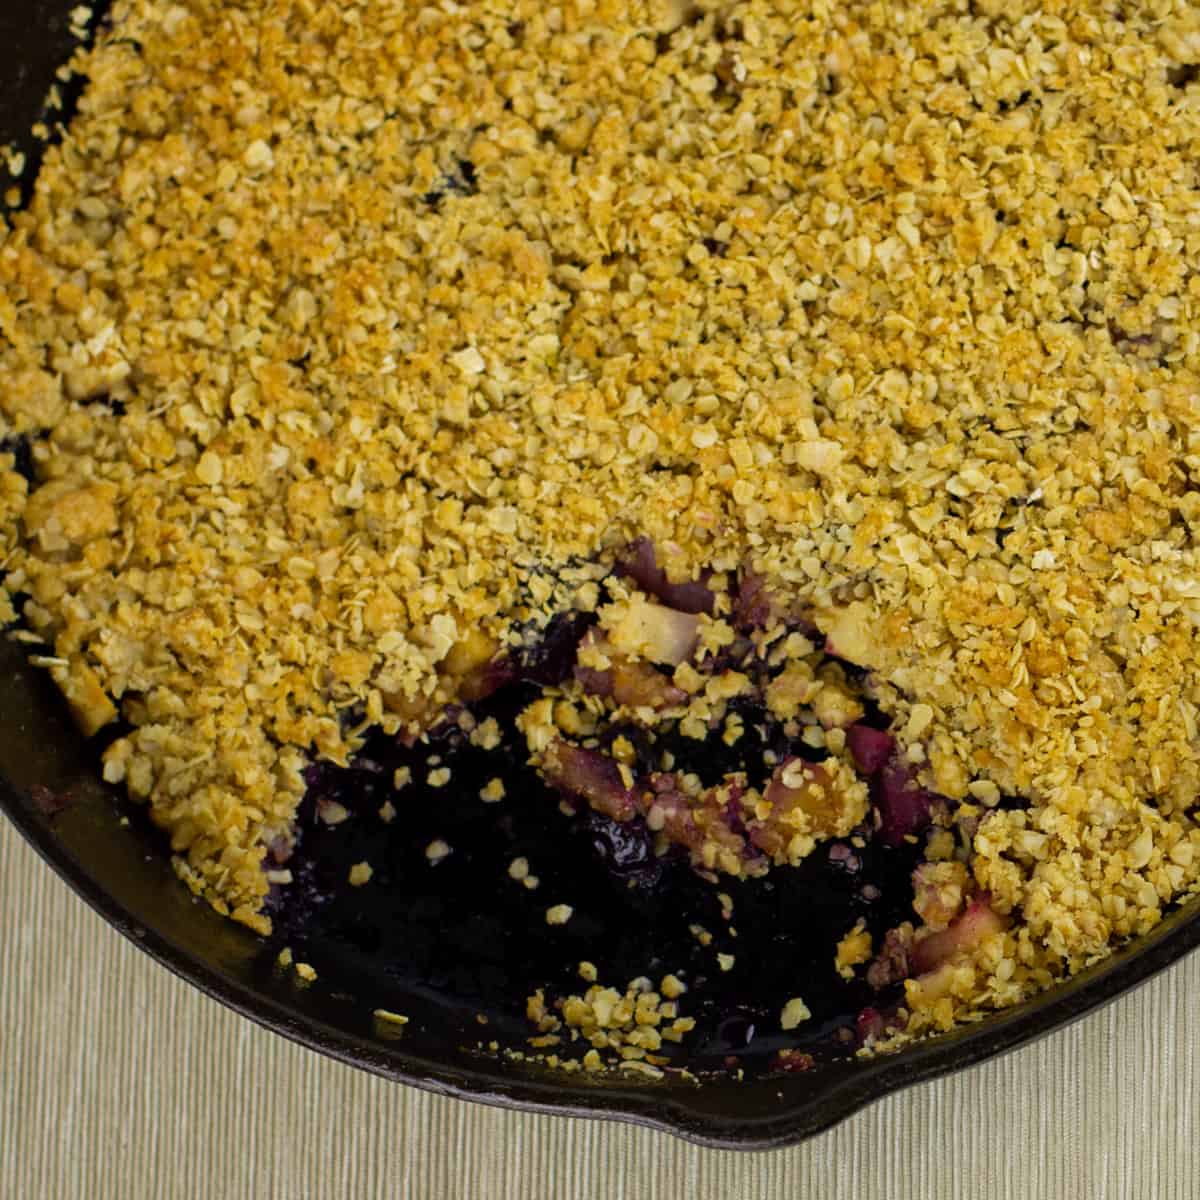 A cast iron skillet with baked crumble.